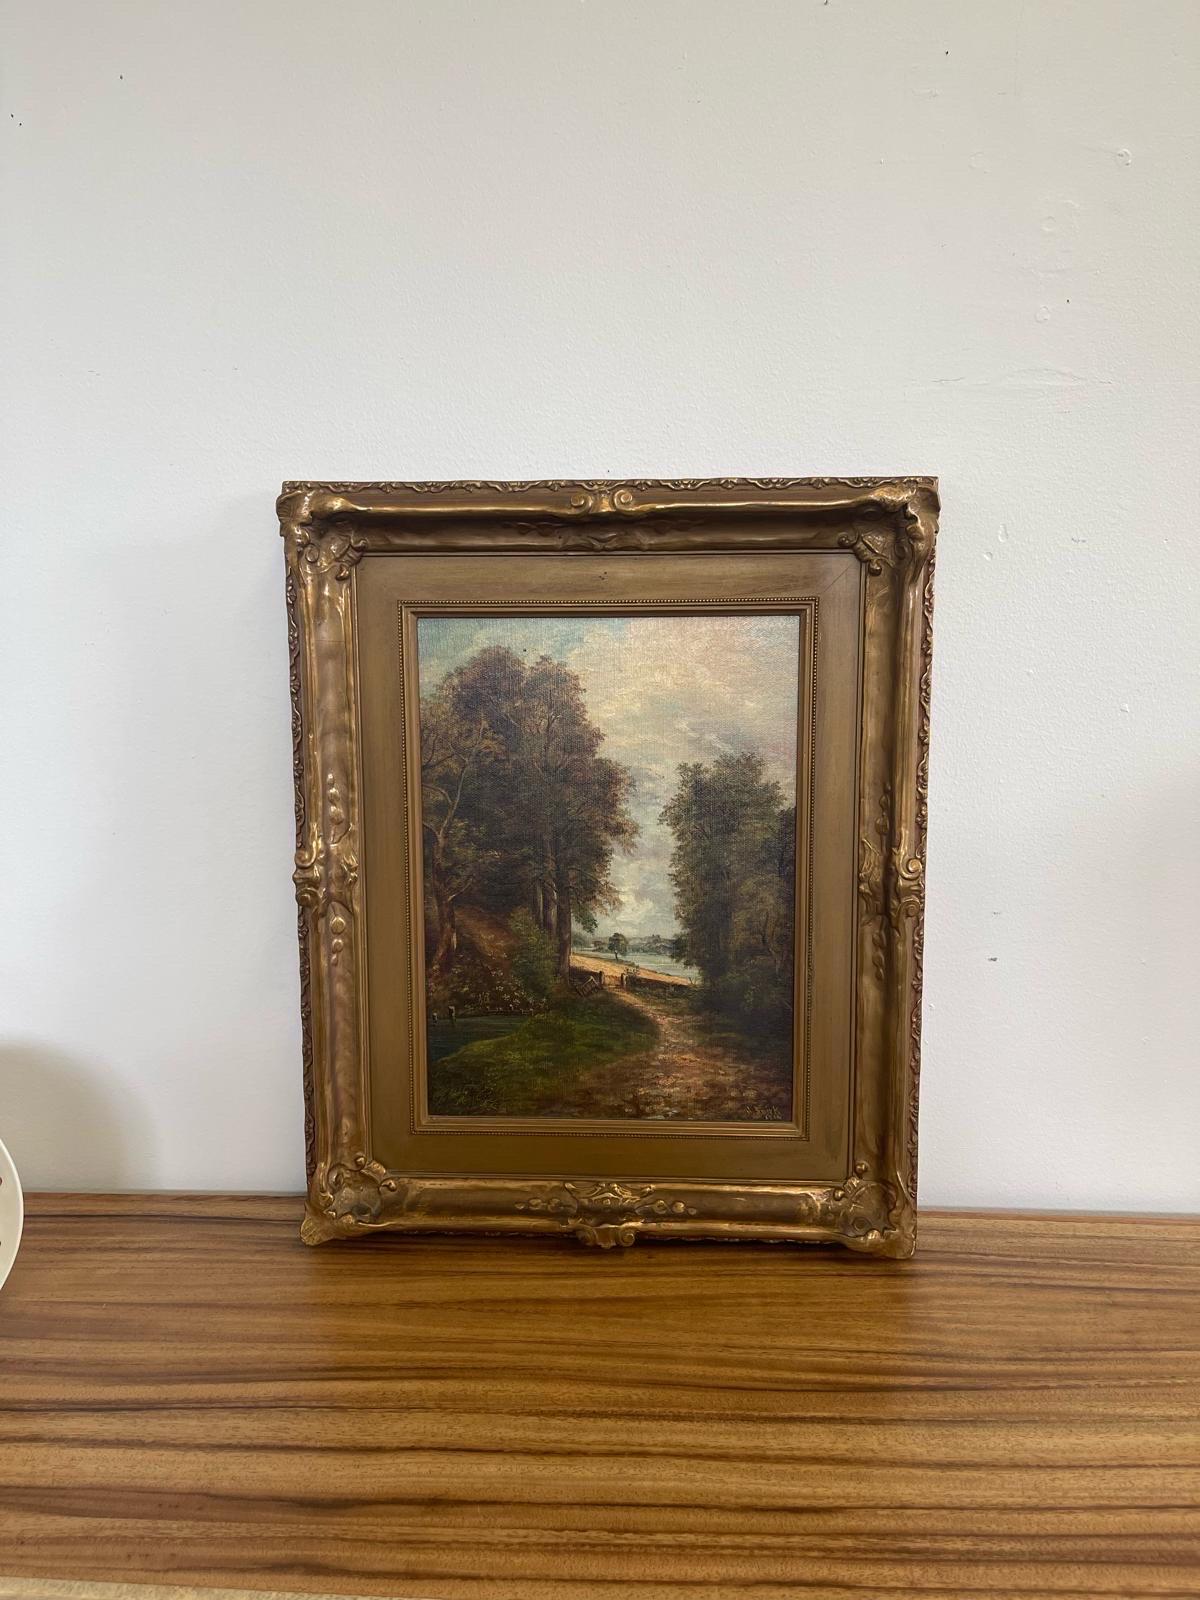 Beautiful Petina on this Piece due to Aging. Professionally Framed. Signed and Dated 1914 in the Lower Corner as Shown. Vintage Condition Consistent with Age as Pictured.

Dimensions. 19 1/2 W ; 1 D ; 24 H